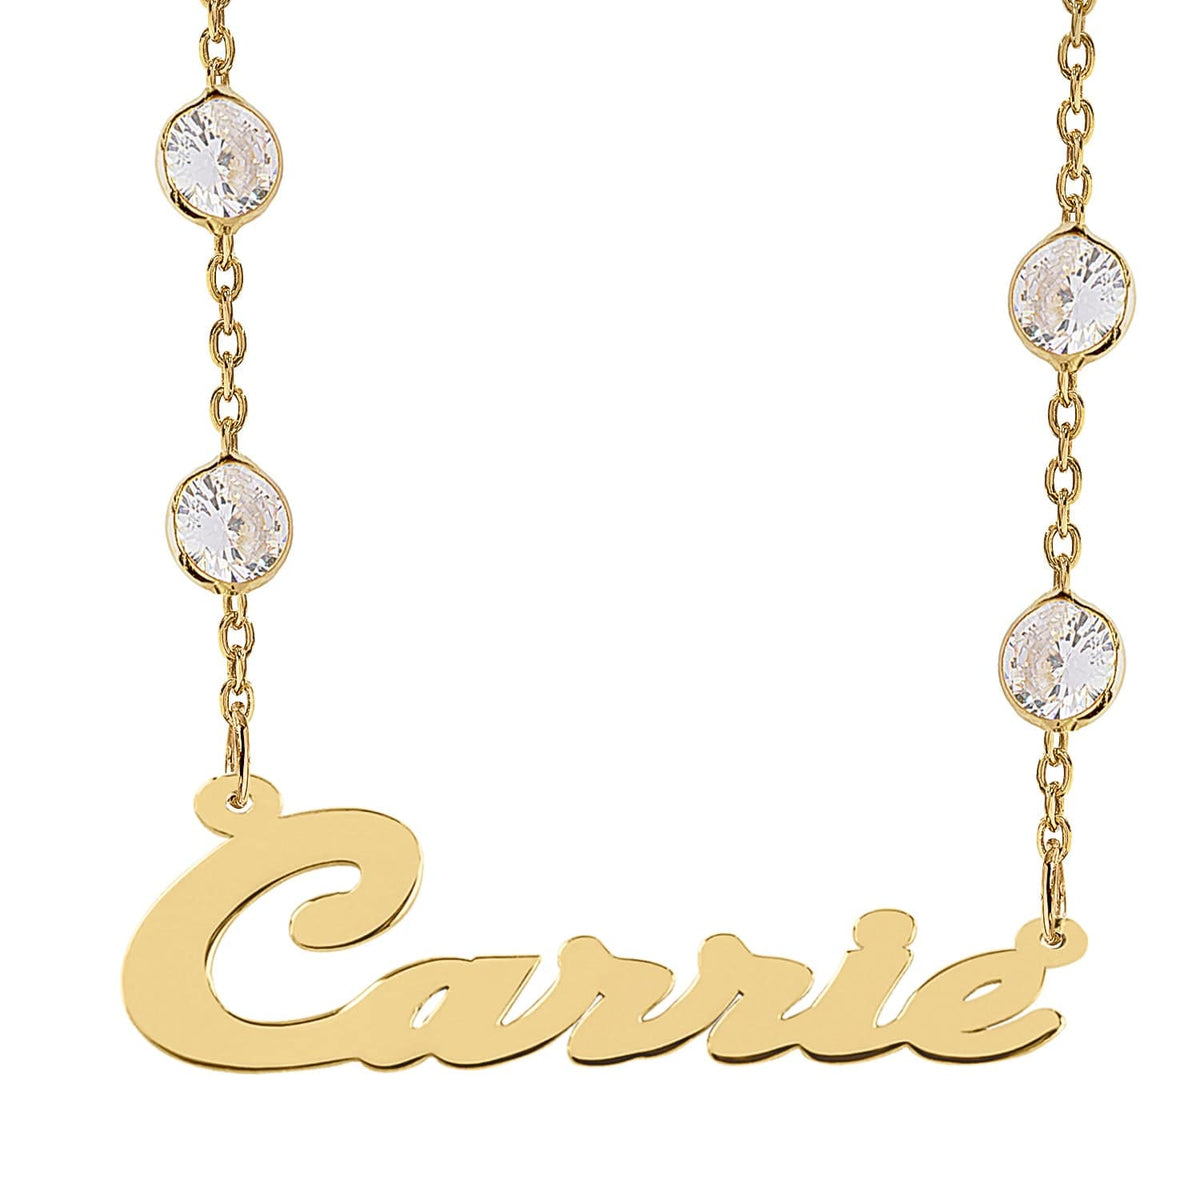 10K Solid Gold / Zirconia Chain Solid Gold Script Name Necklace &quot;Carrie&quot;